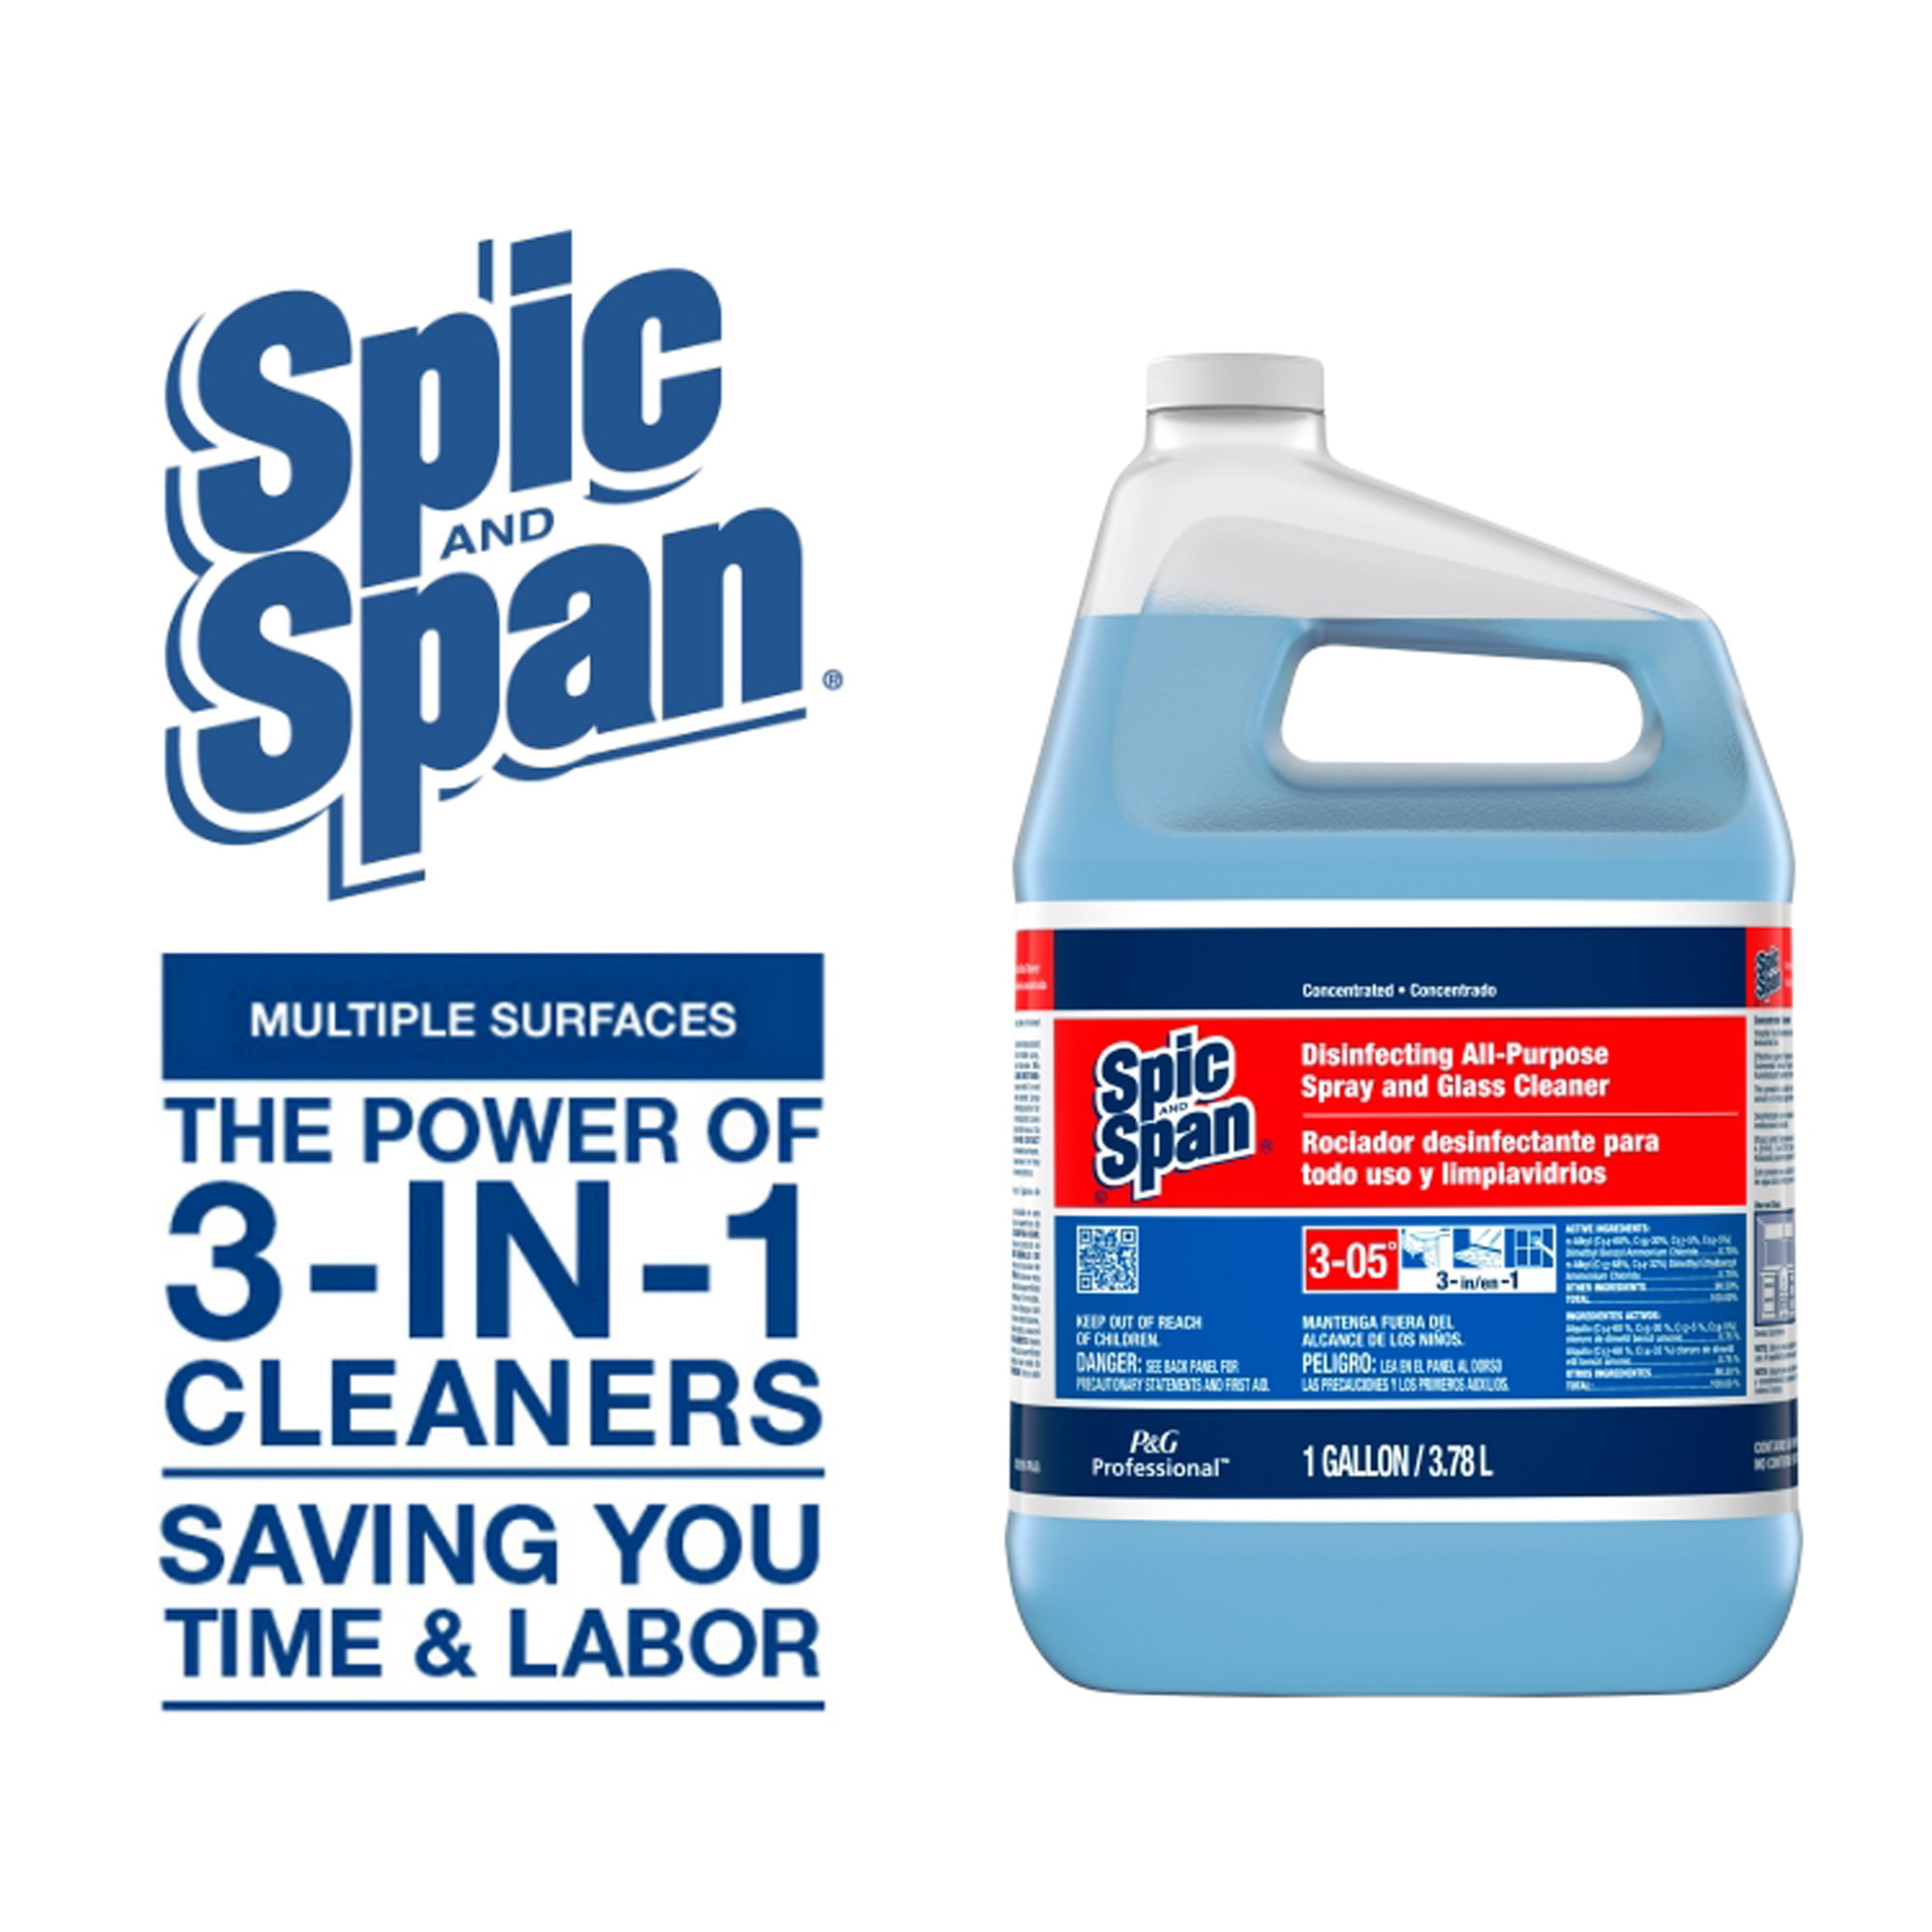 Spic and Span, PGC32538, Spic/Span Concentrated Cleaner, 1 Each